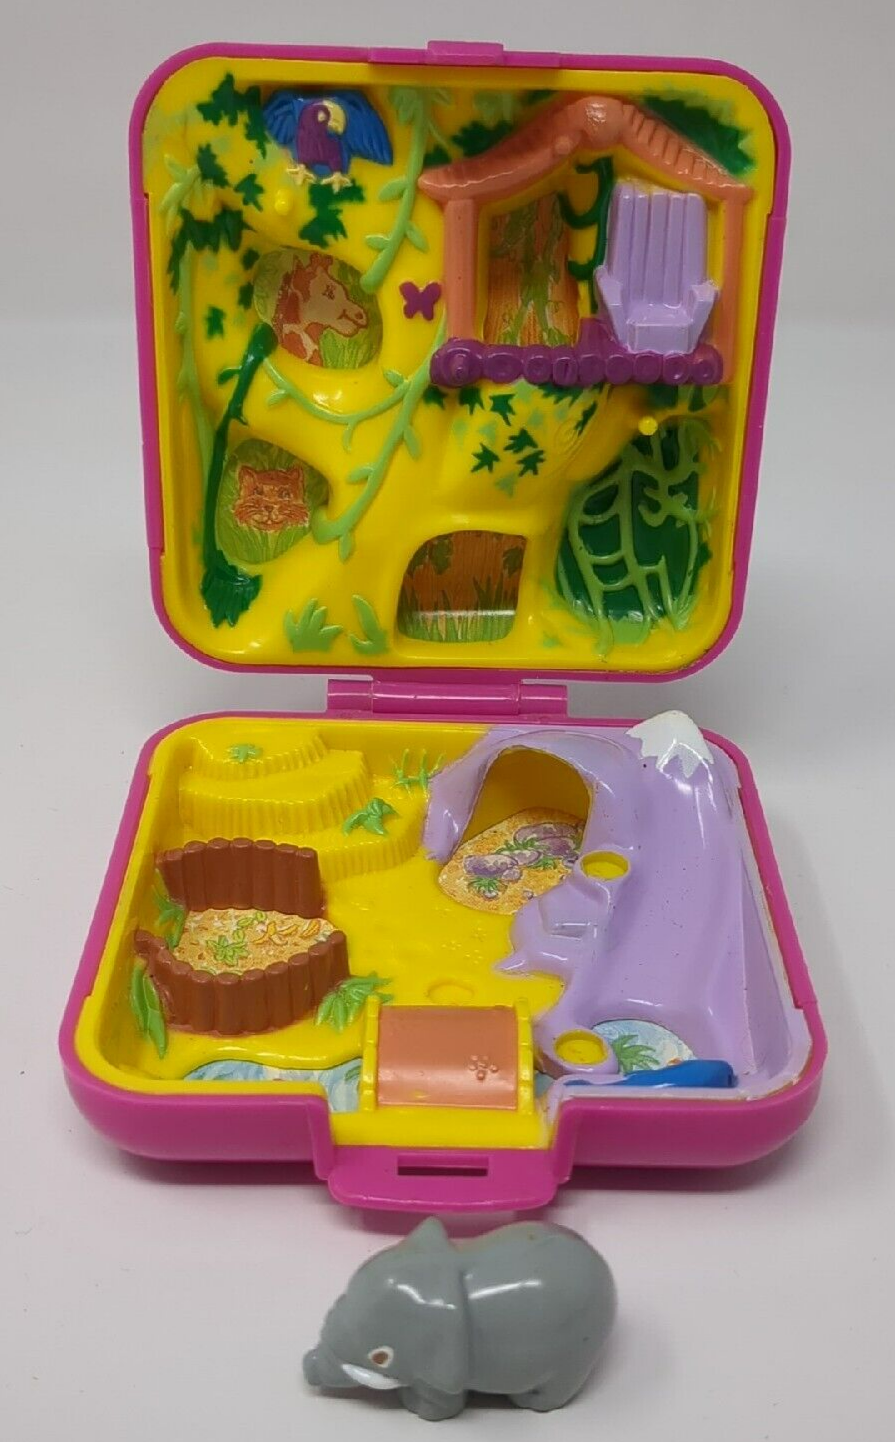 Vintage 1989 Polly Pocket Wild Zoo World With Elephant Bluebird Compact 1980s - $19.39